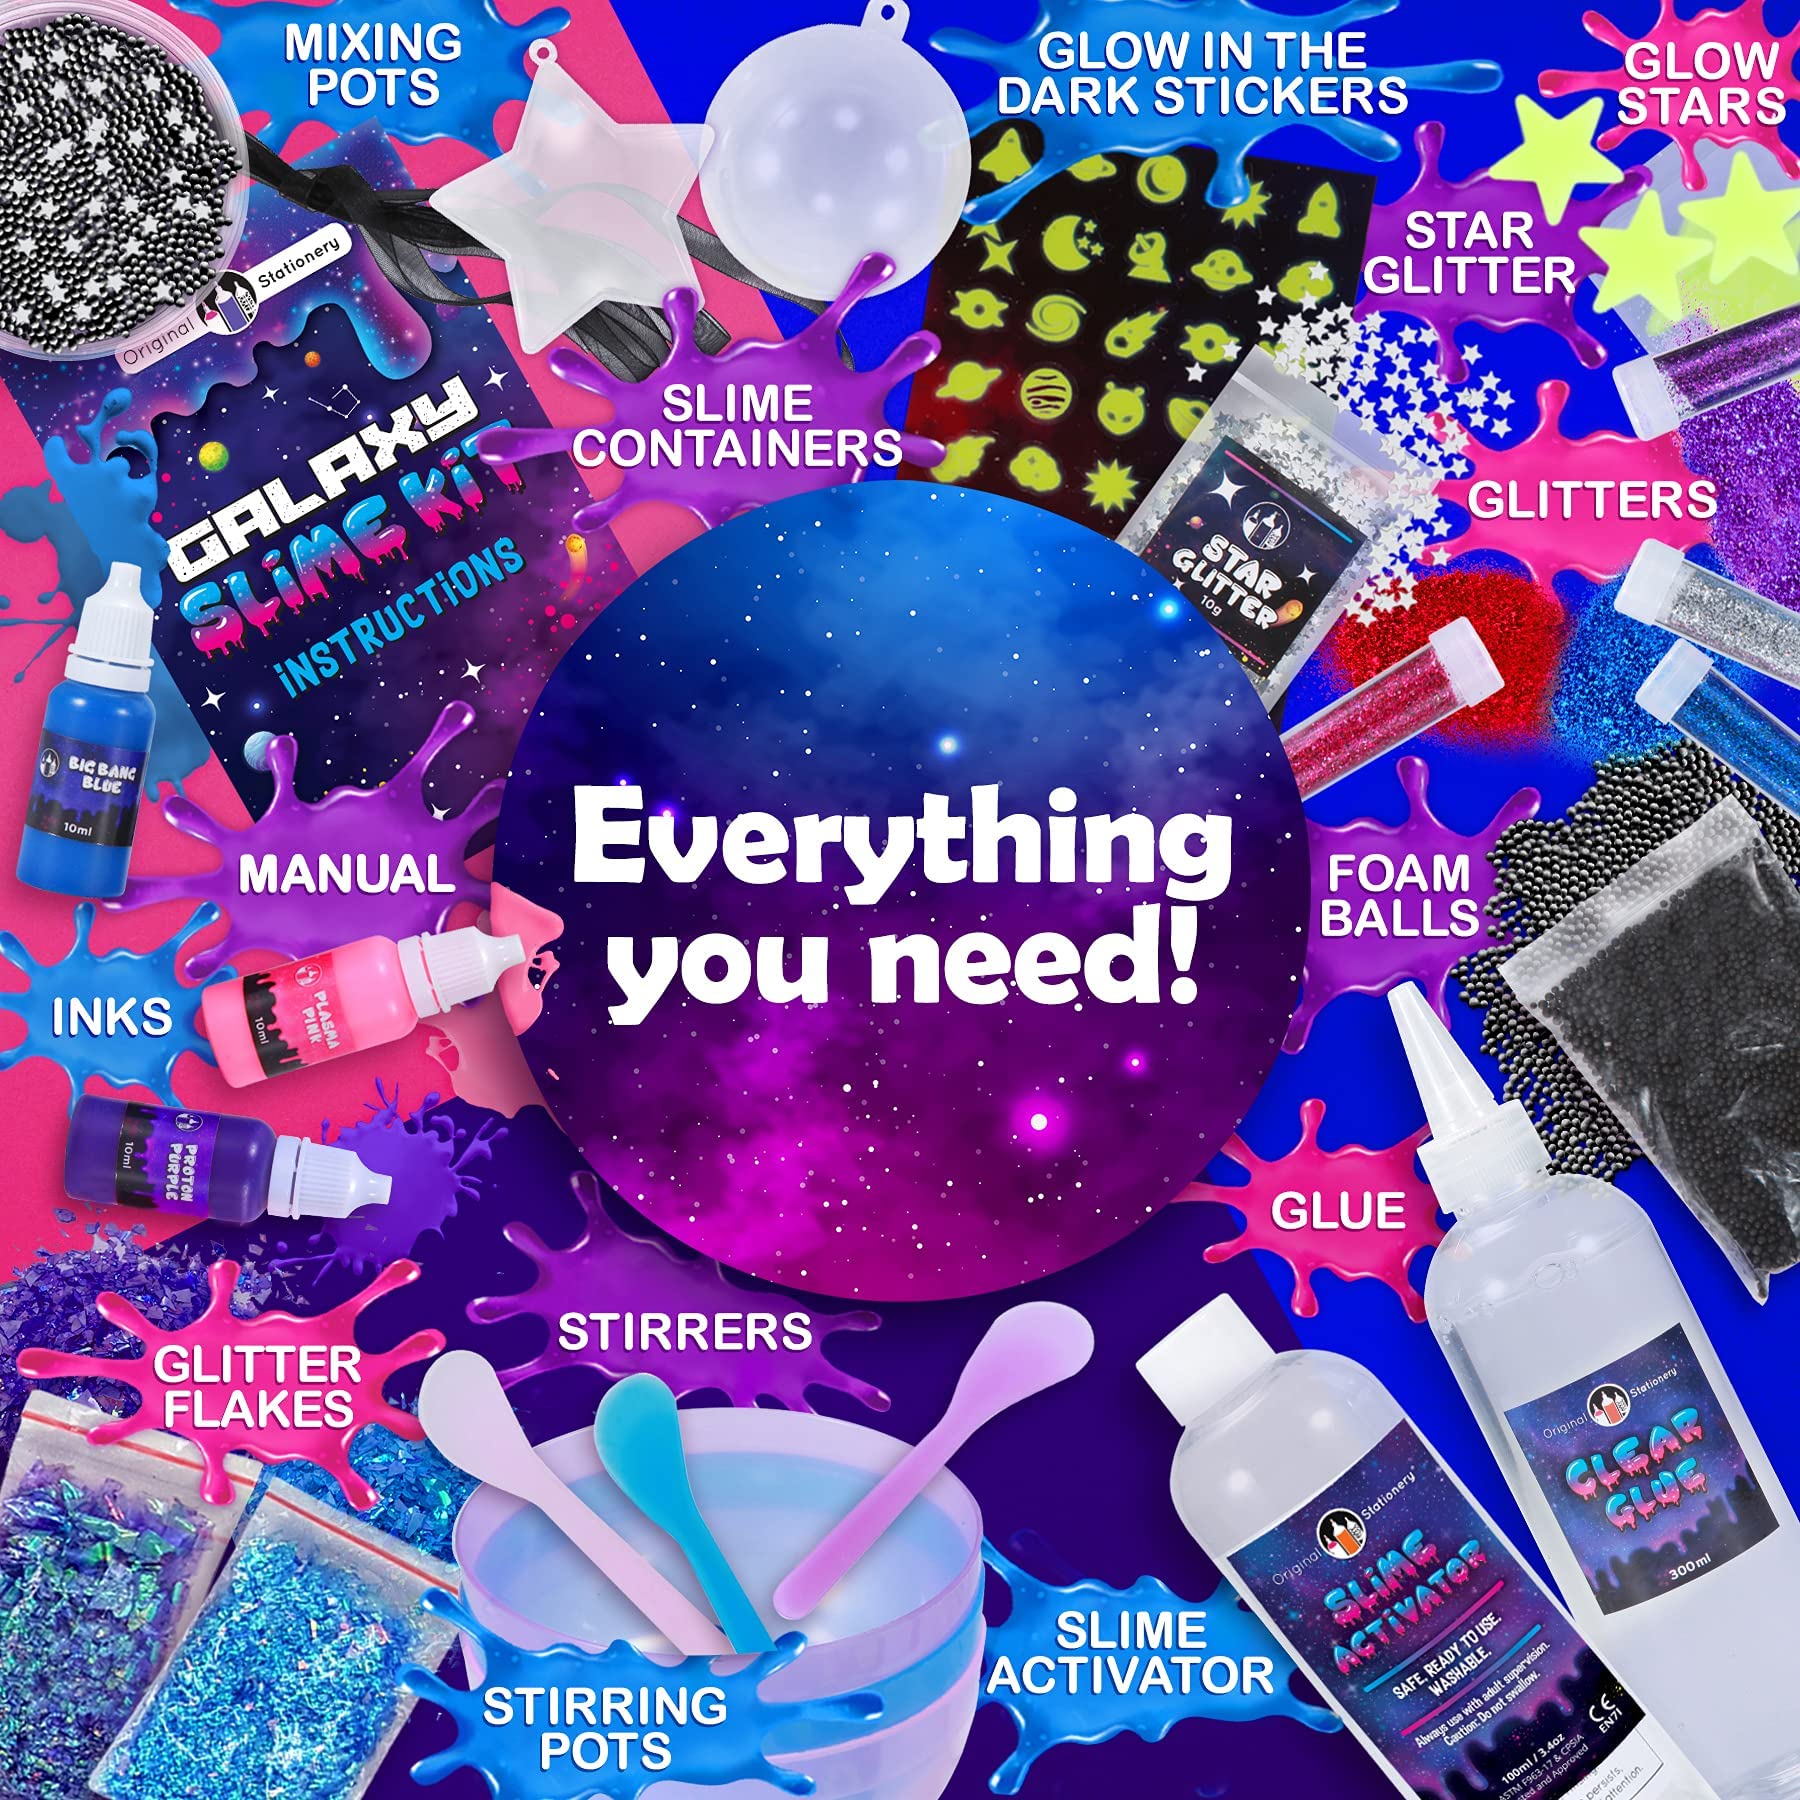 EXPERTOYS DIY Make Your Own Slime, 3 in 1 Slime making Kit, 7 years and  above, Make amazing Neon, Glow in Dark and Galaxy Slimes